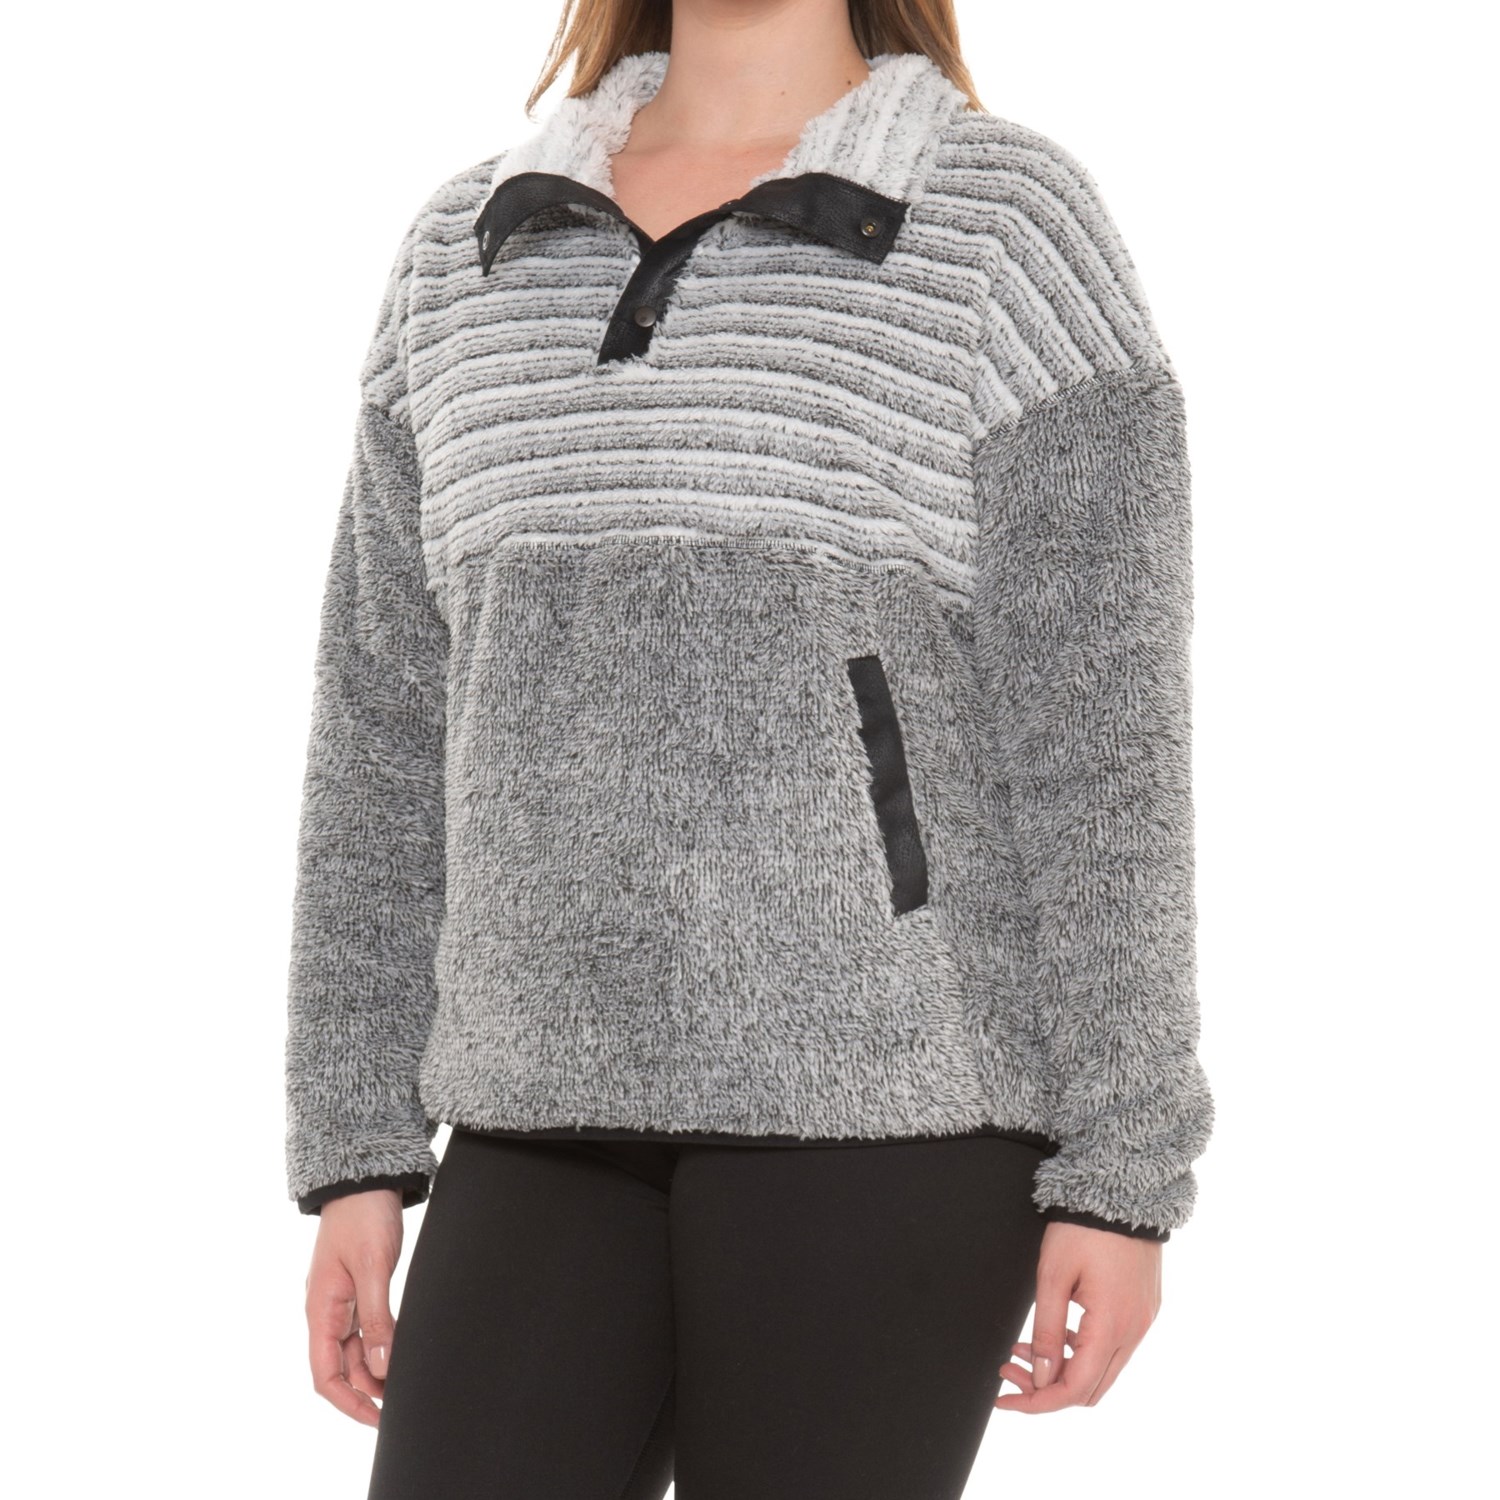 Wooly Bully Wear Angelic Snap Neck Shirt - Long Sleeve - Save 42%